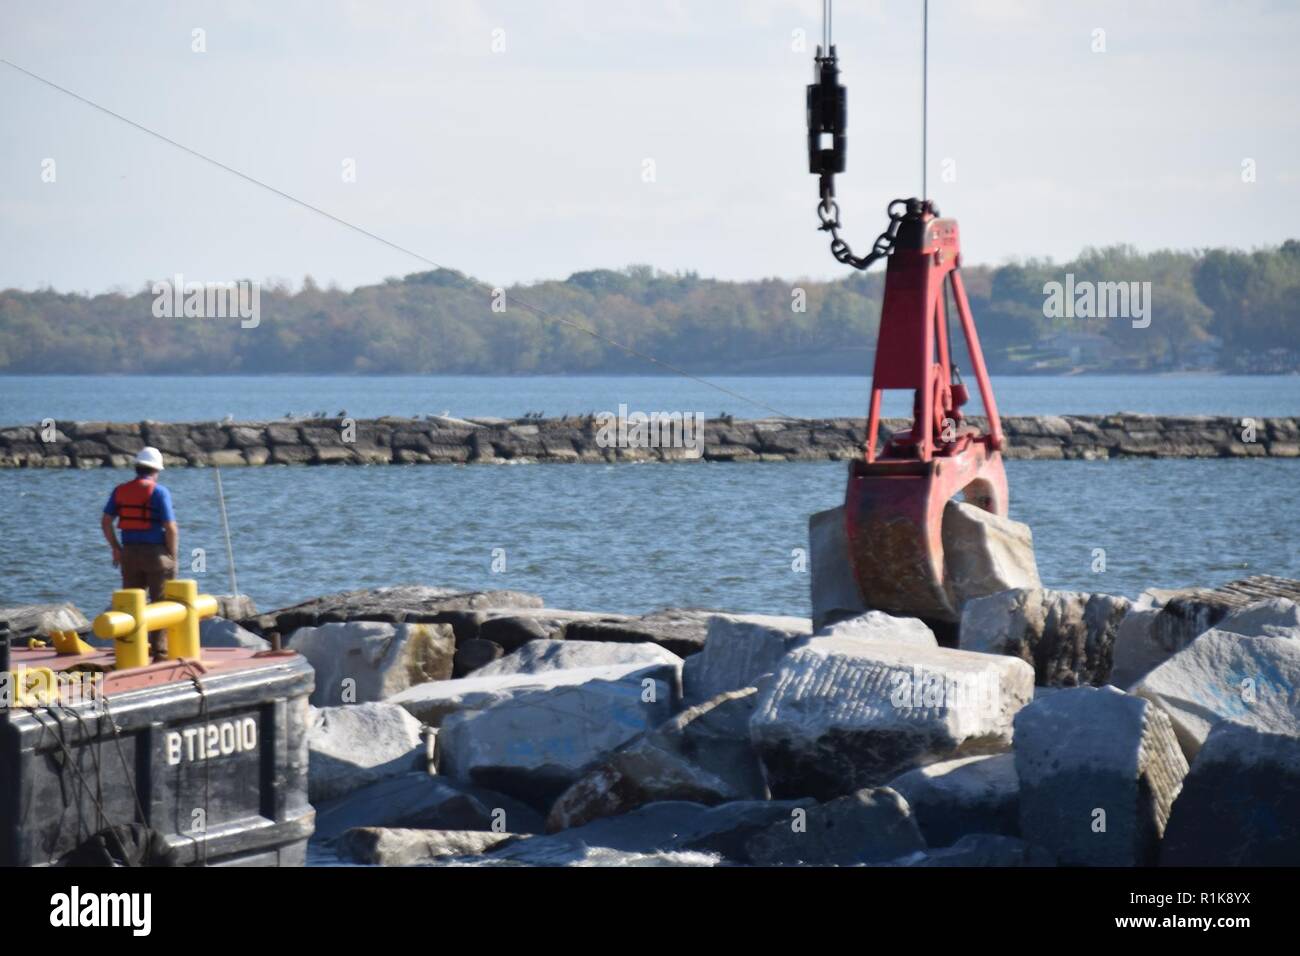 The U.S. Army Corps of Engineers, Buffalo District repairs the west arrowhead breakwater at Oswego Harbor in Oswego, NY, October 10, 2018. The project will repair 600 feet of the breakwater using armor stone in the 12-20 ton range. The repairs are critical to providing safe navigation and supports the local and national economies. Stock Photo